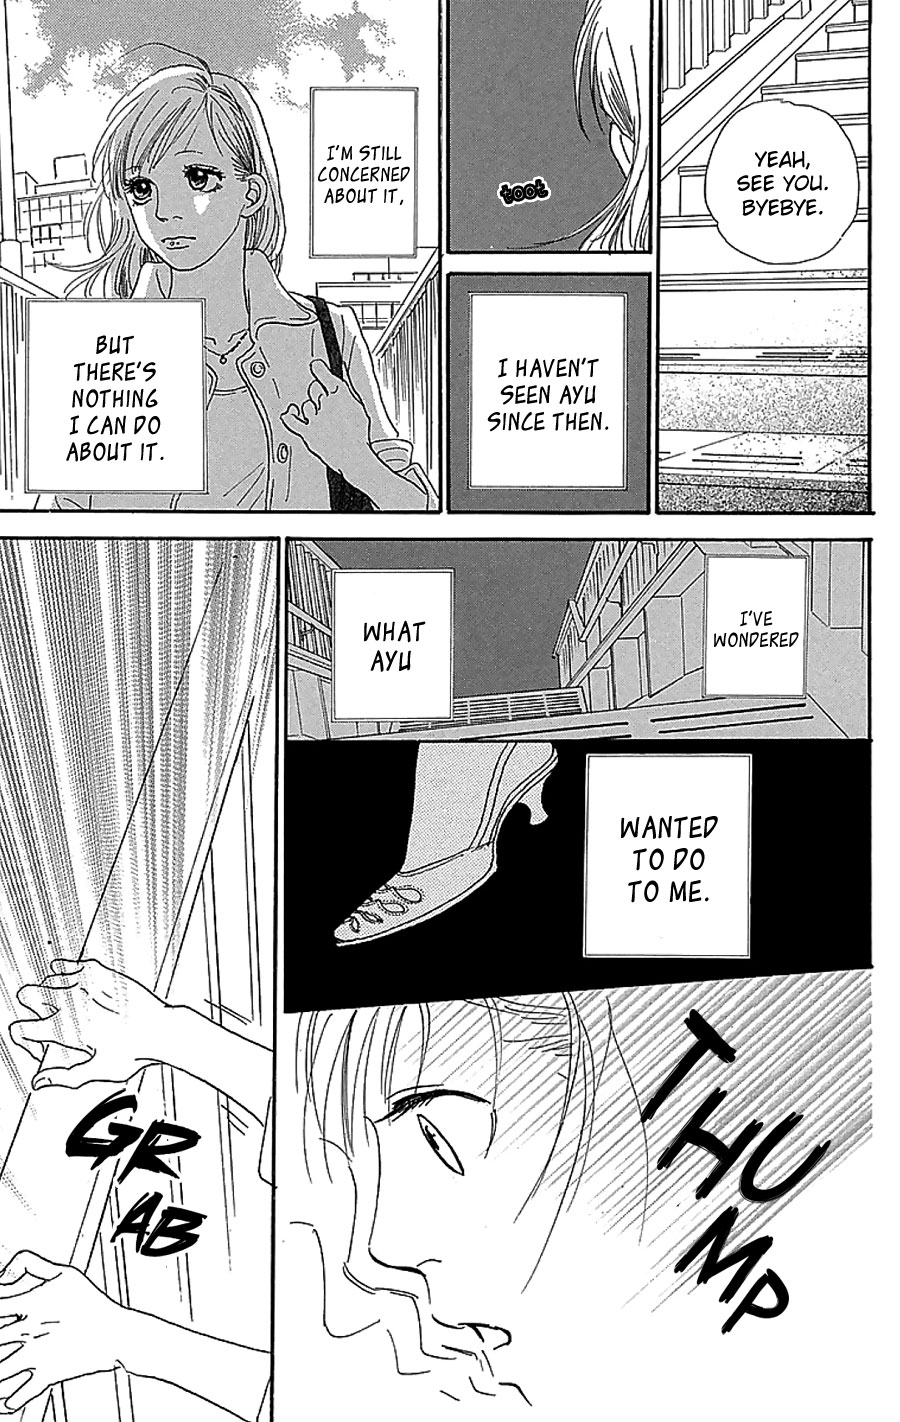 Present Vol. 1 Ch. 3 There's Something I Want To Ask You